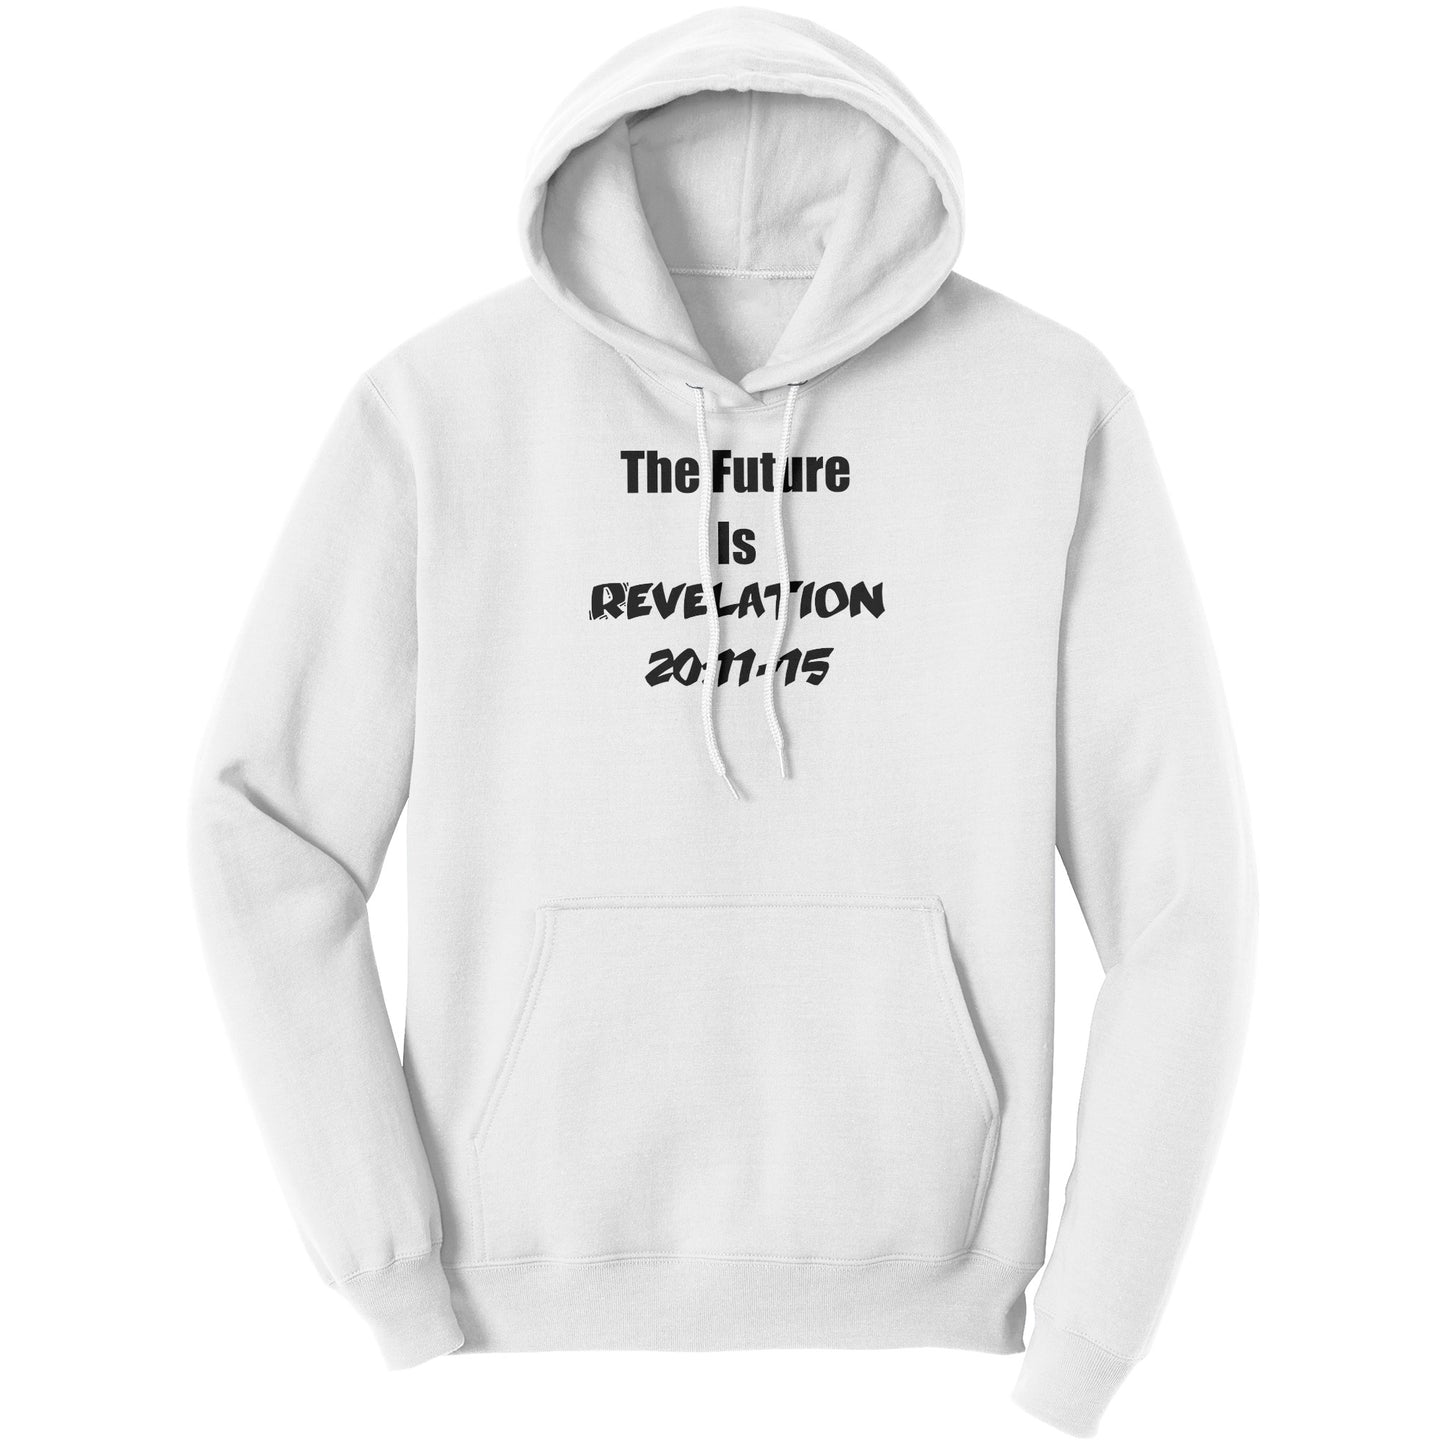 The Future is Revelation 20:11-15 Hoodie